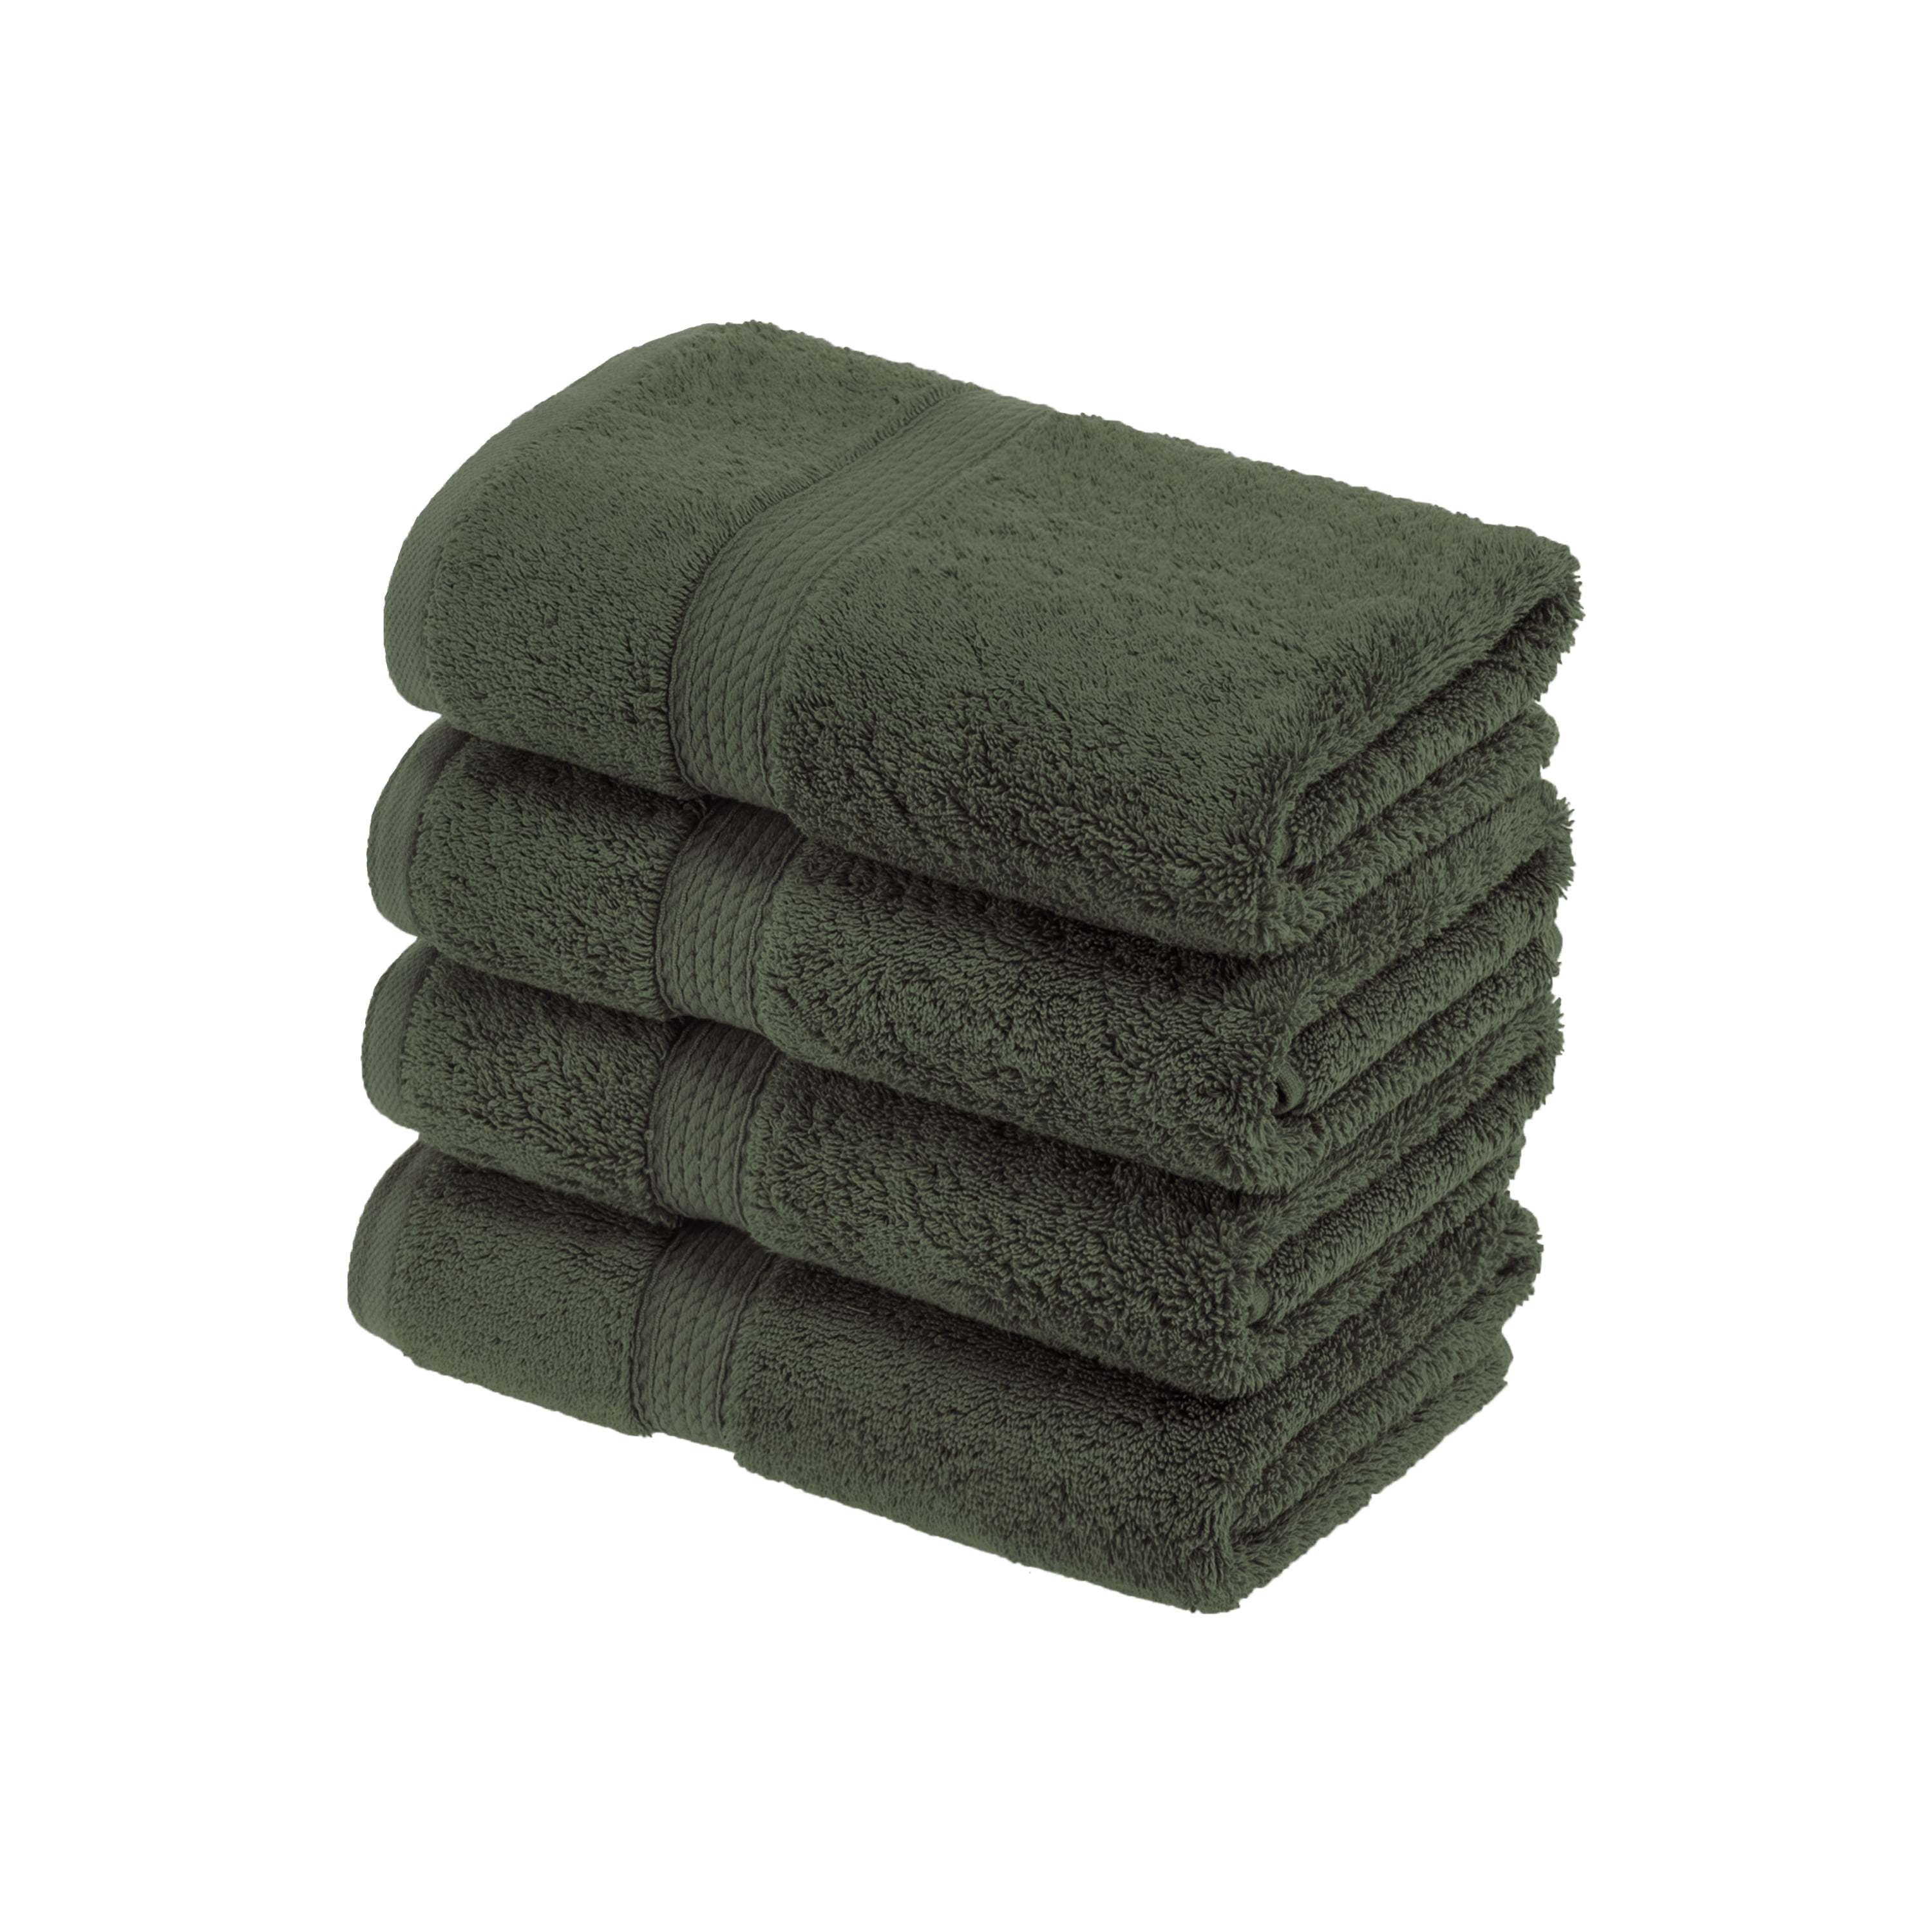 Green, Gold & Black Hand Towels Premium - Hand Towels - Phoenician Artisan, Wholesale for Home Gifts & Lifestyle